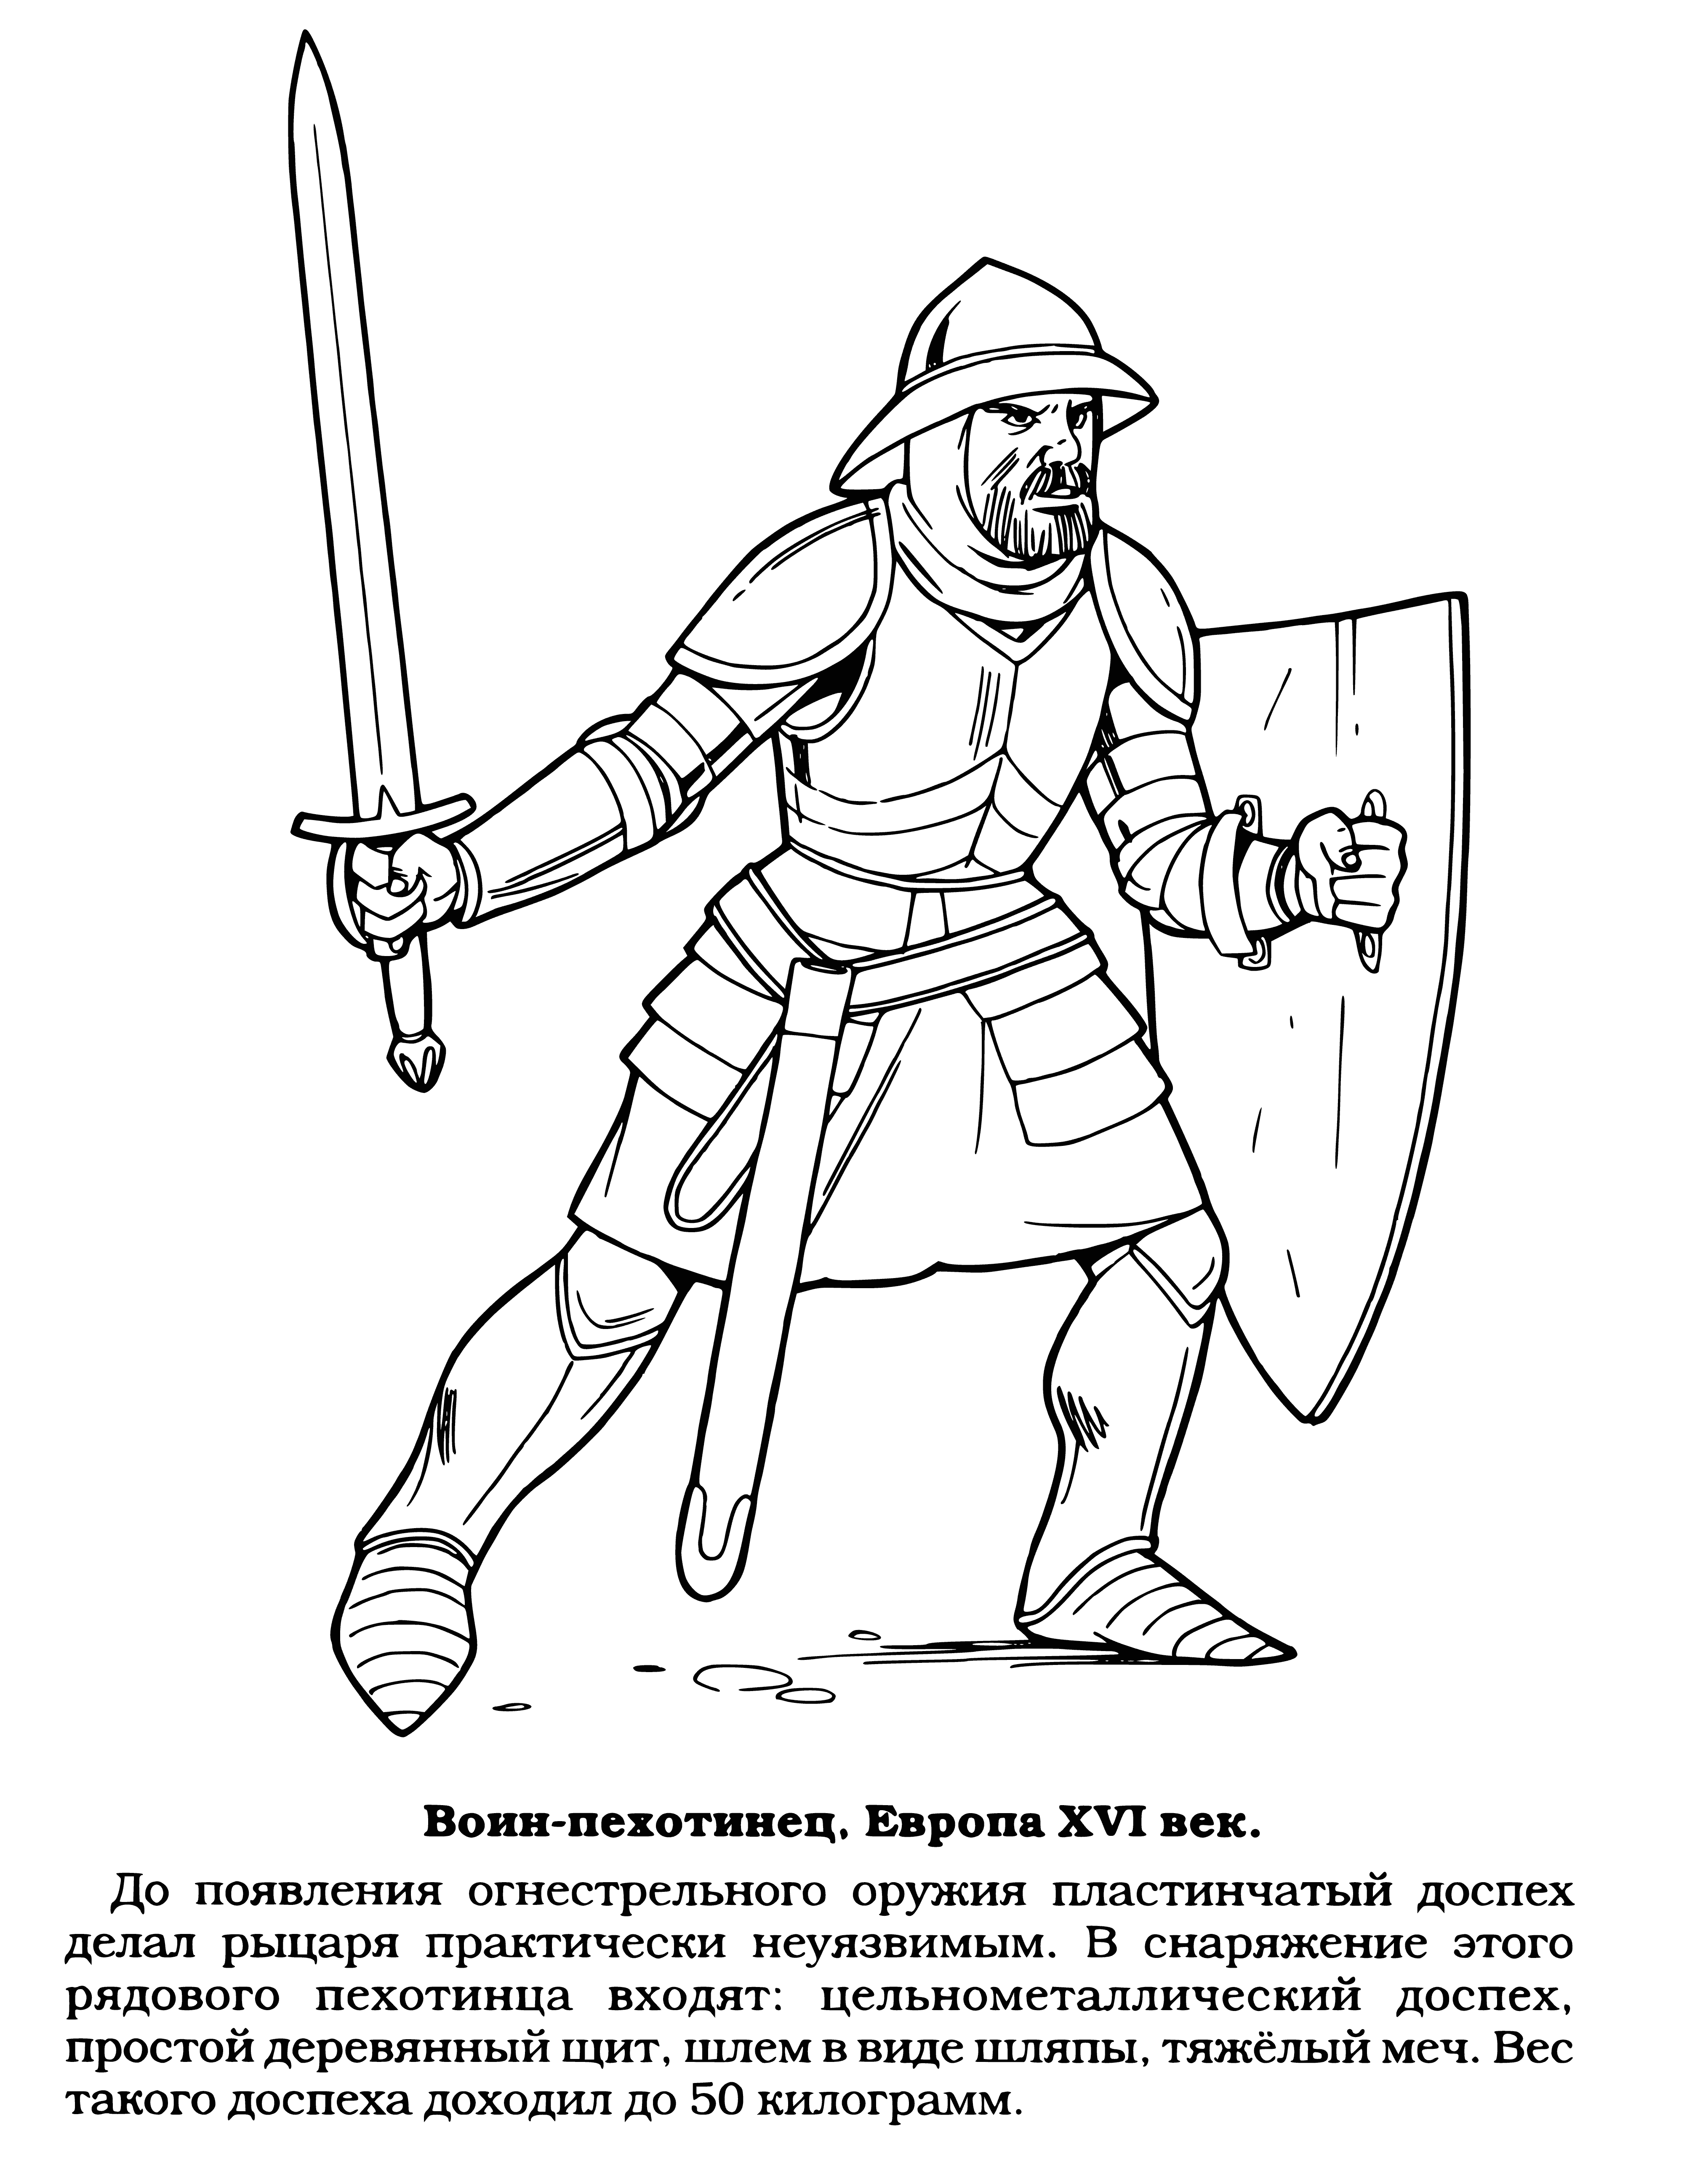 coloring page: Four warriors standing in line, two swords and two shields, all wearing armor and helmets, two with visors down. #art #coloringpage